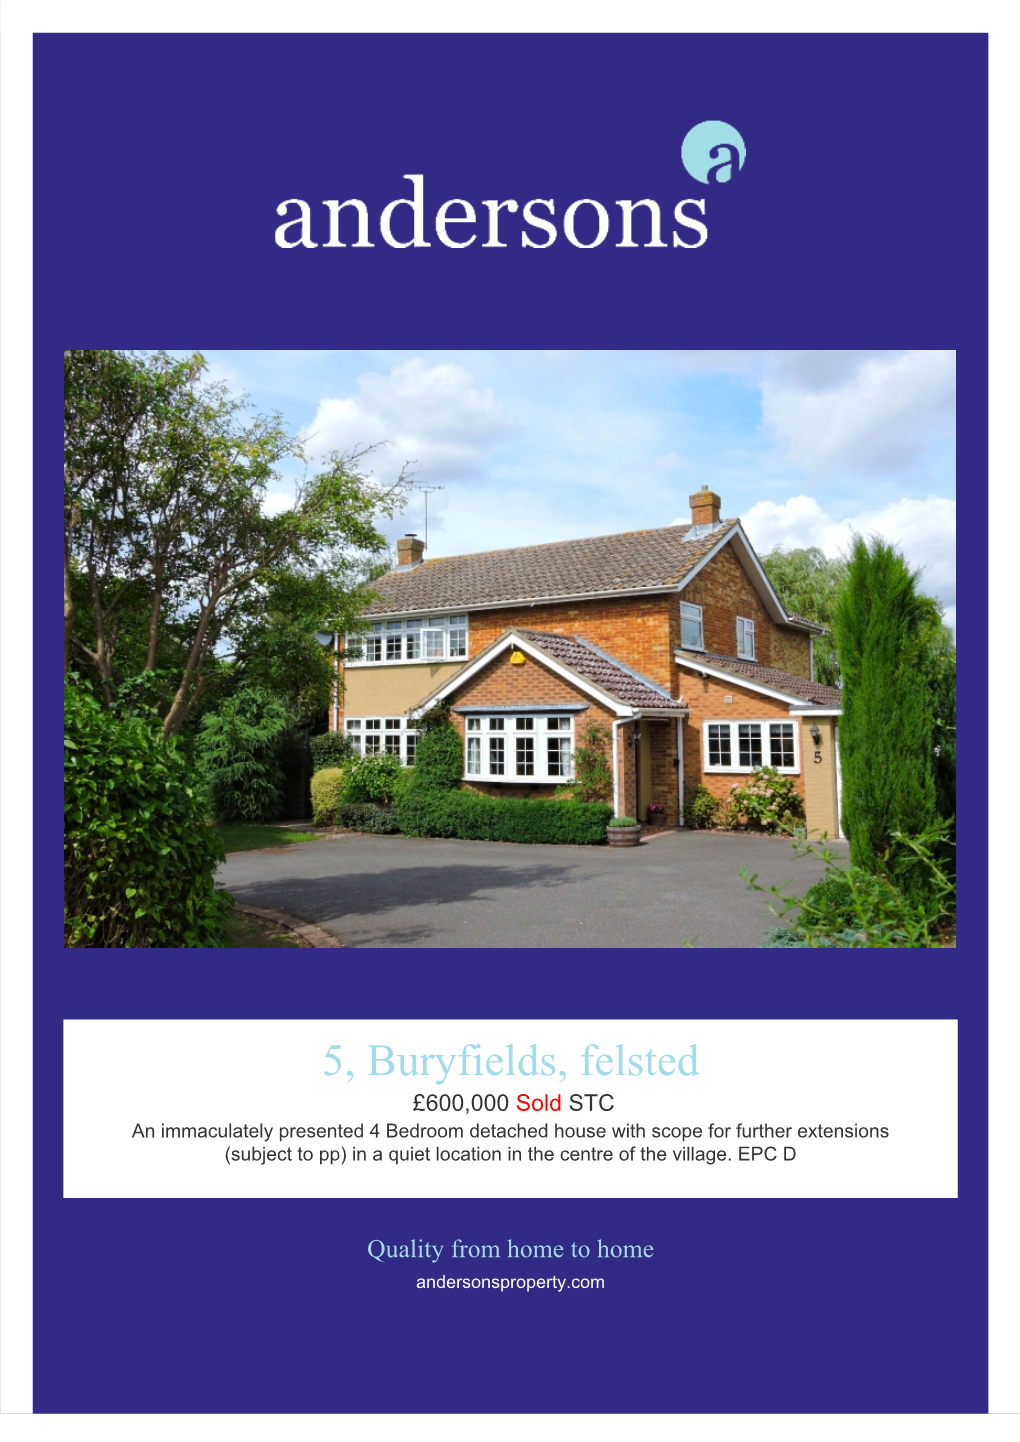 5, Buryfields, Felsted £600,000 Sold STC an Immaculately Presented 4 Bedroom Detached House with Scope for Further Extensions